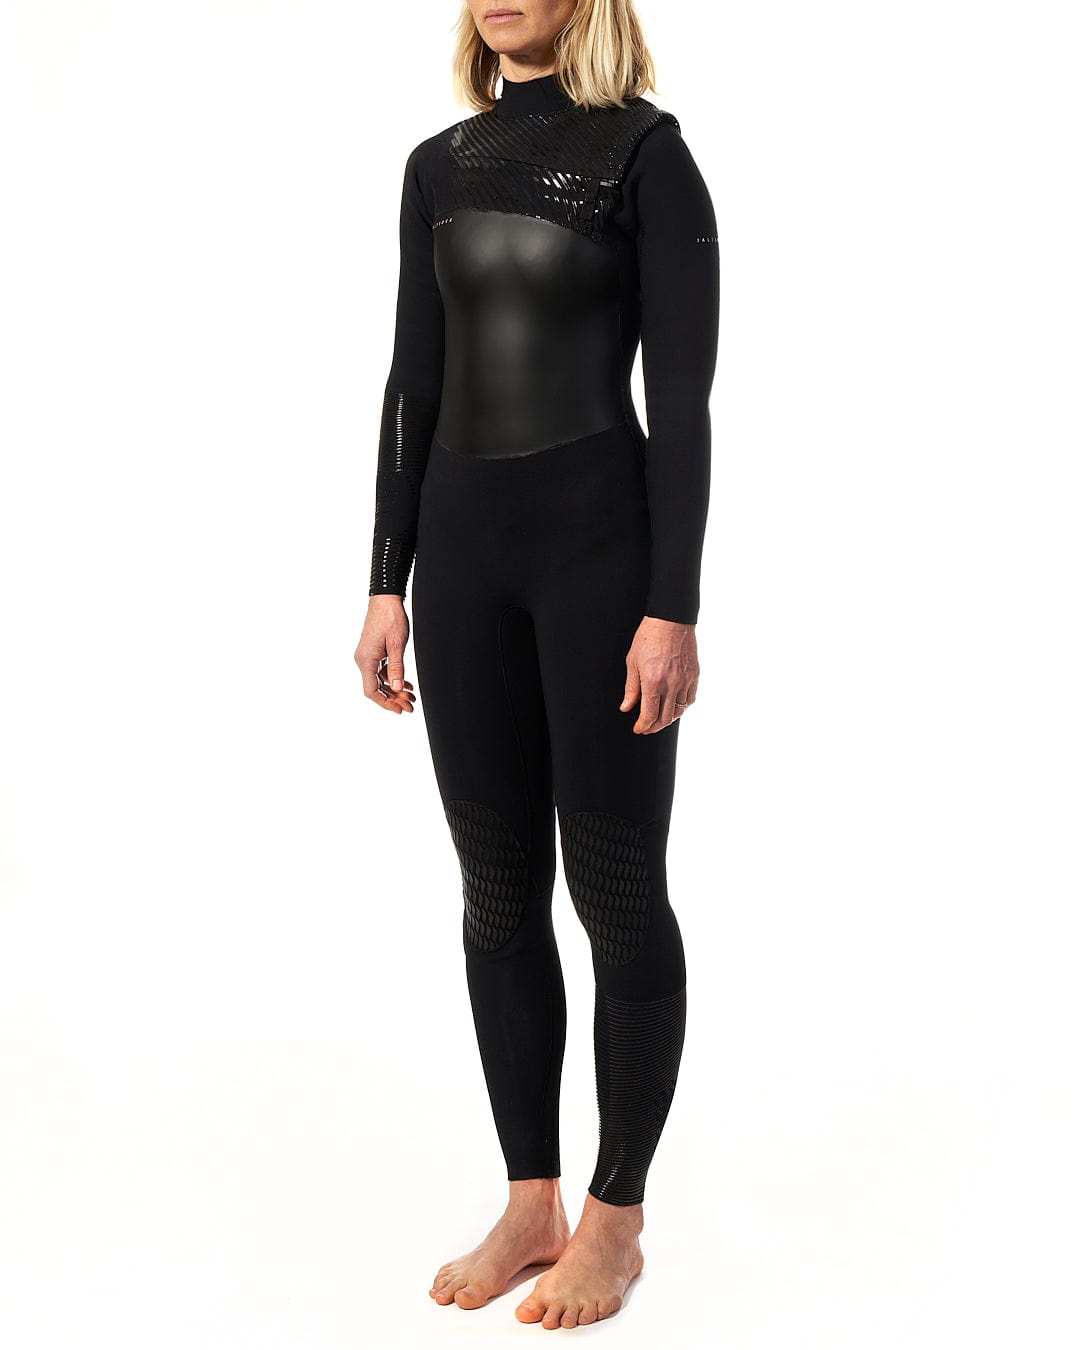 A woman is standing in front of a white background in a Saltrock Shockwave - Womens 3/2 Front Zip Full Wetsuit - Black.